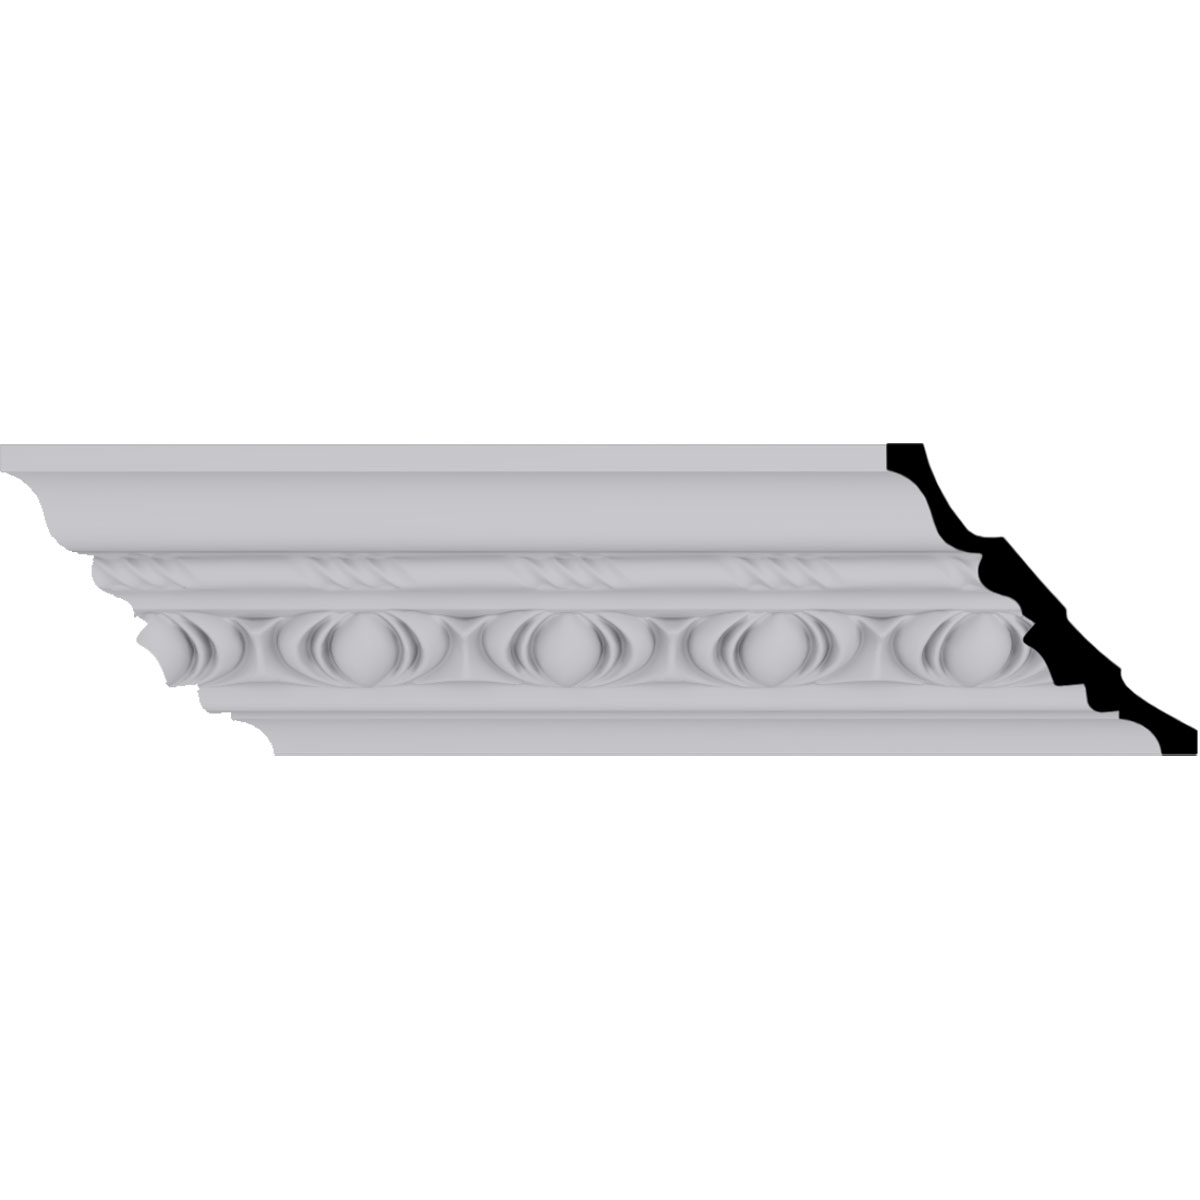 4 3/4"H x 4 3/4"P x 6 3/4"F x 94 3/8"L, (3 1/8" Repeat), Jackson Egg and Dart Crown Moulding - image 1 of 10